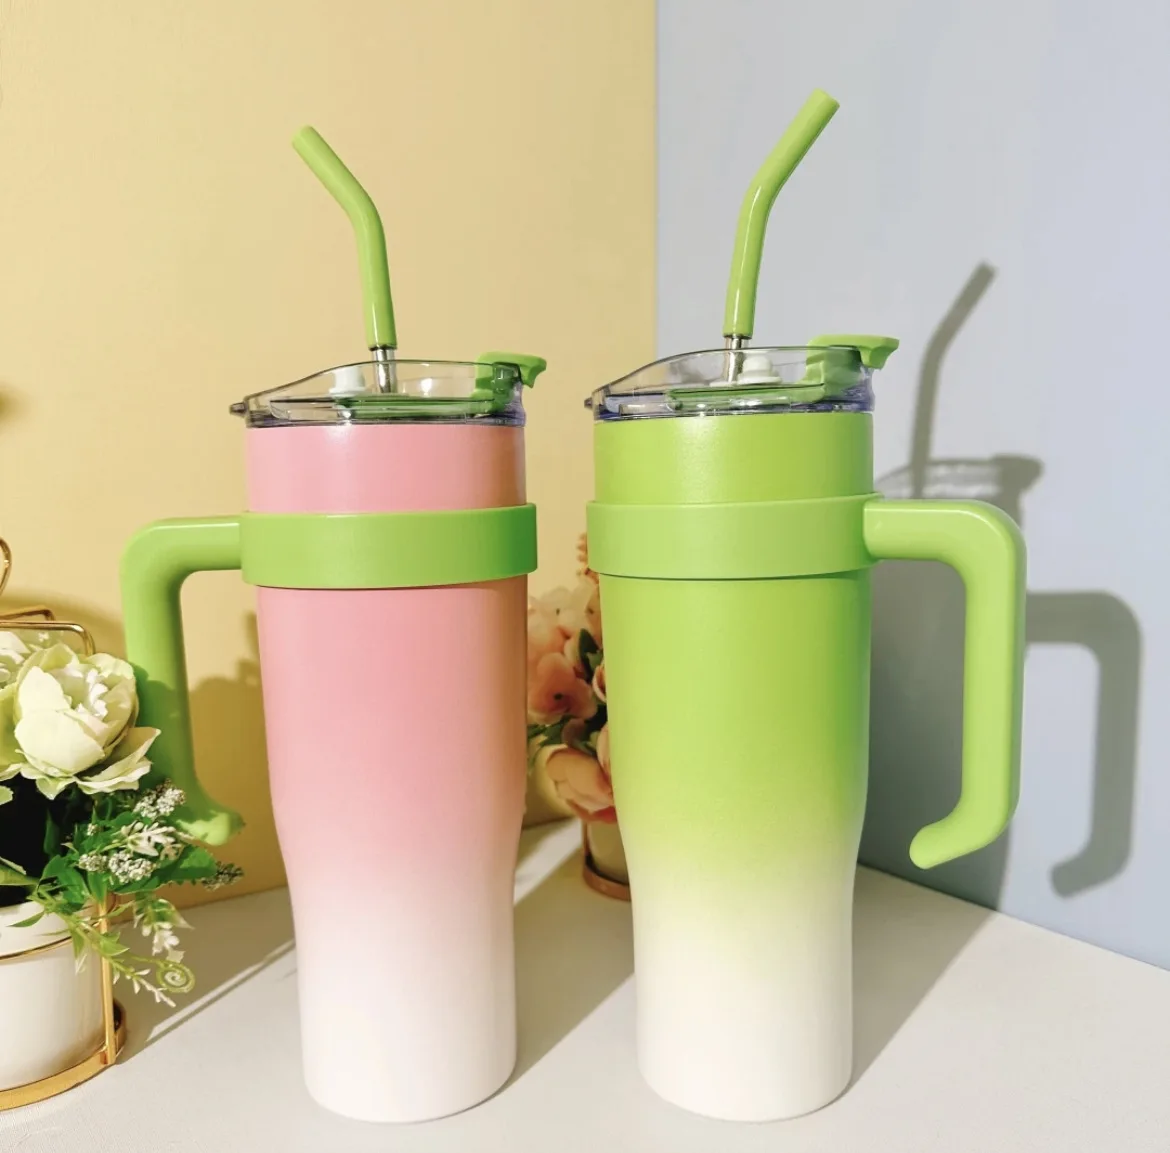 https://ae01.alicdn.com/kf/S28cd2ed5a4974e87a14005648442d4bf0/40oz-Mug-Water-Bottle-with-Handle-Cafe-Insulated-Tumbler-Straw-Stainless-Steel-Coffee-Termos-Cup-In.jpg